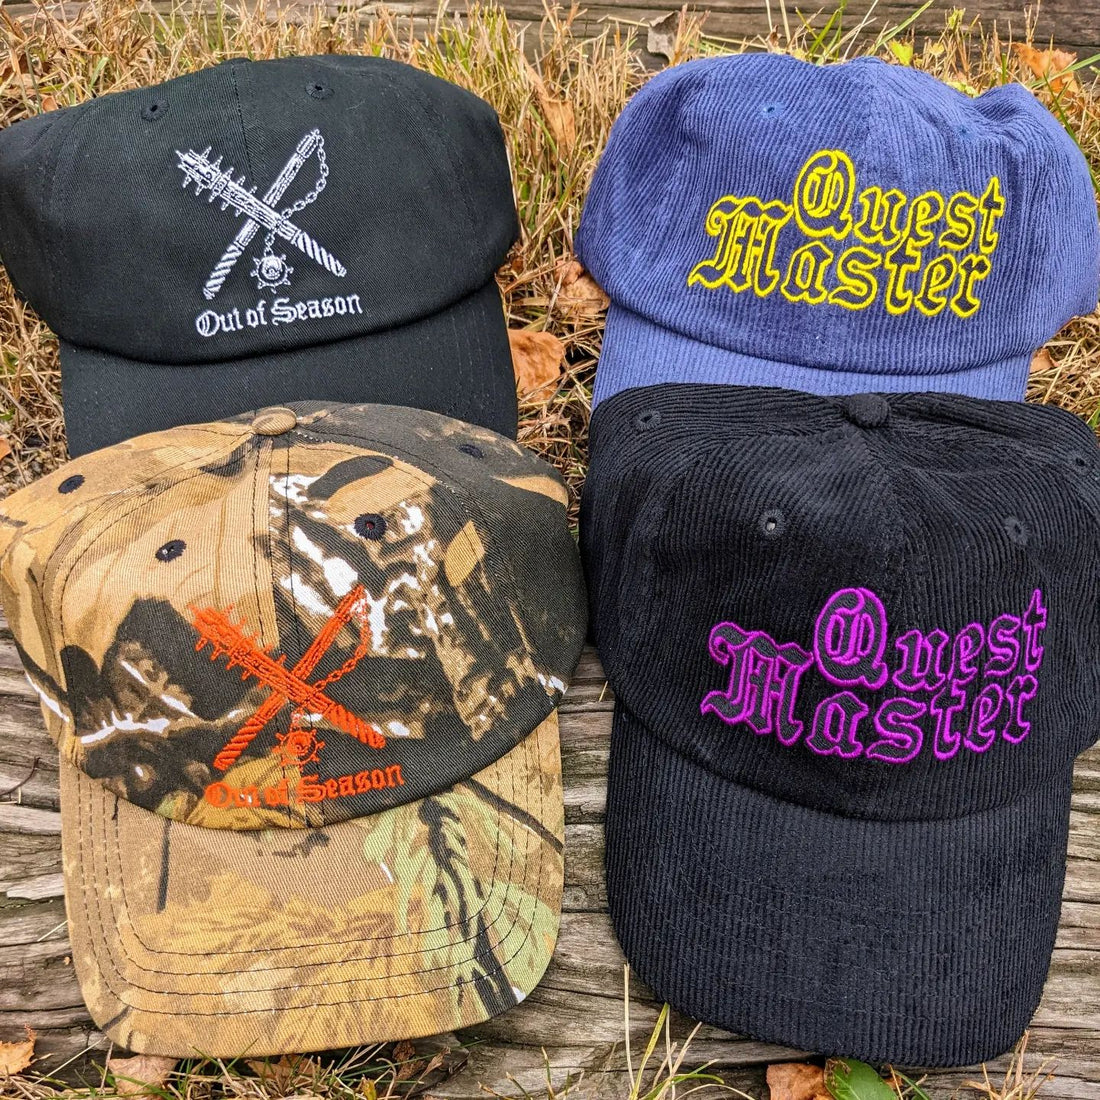 New Quest Master & OoS dad hats plus OoS pullover hoodies are in stock now!